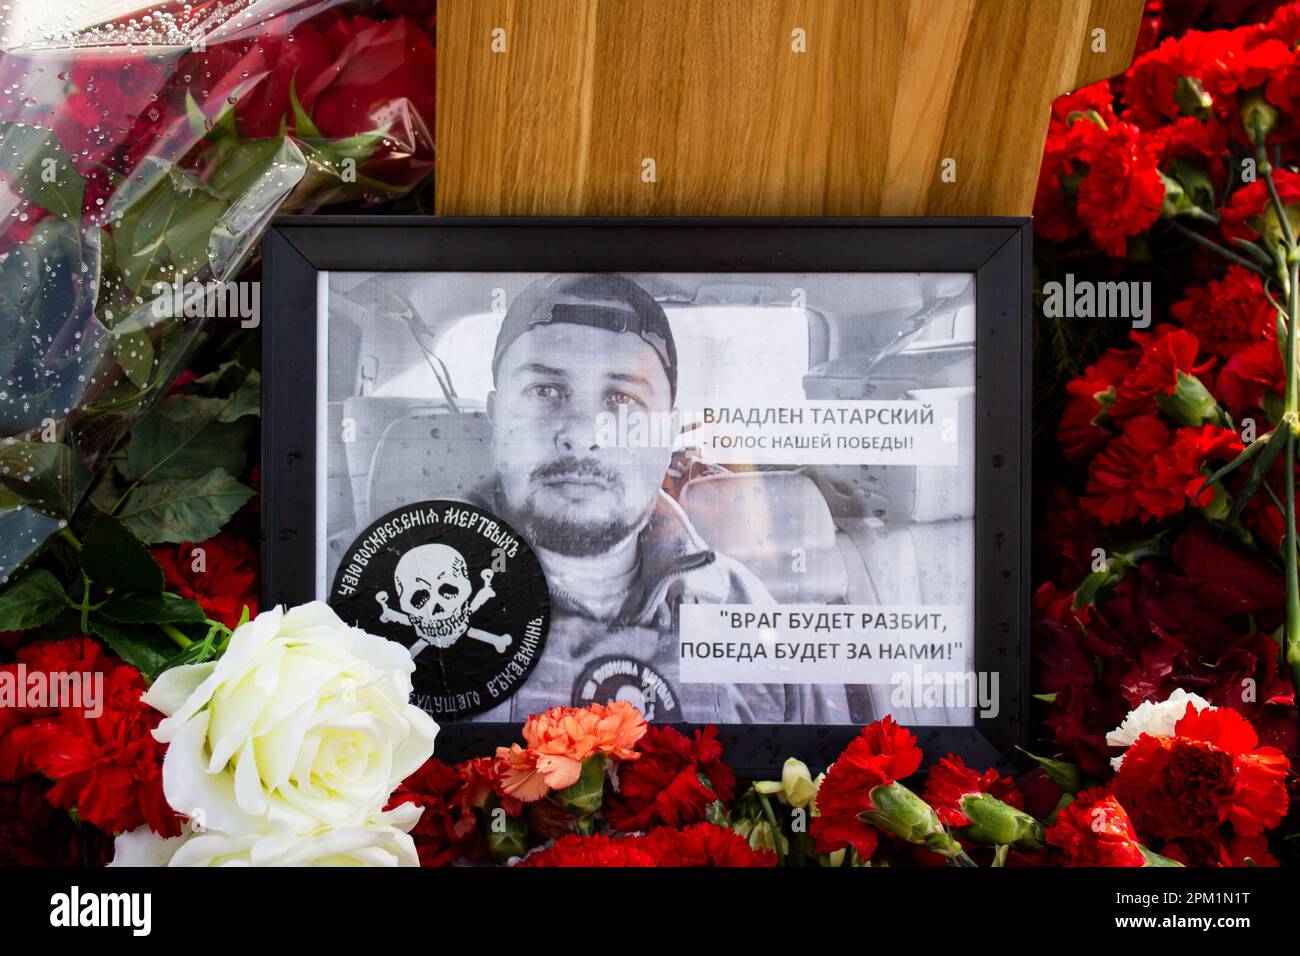 A framed photo of Vladlen Tatarsky at his grave at Troyekurovskoye cemetery in Moscow. Maxim Fomin better known by his pen-name Vladlen Tatarsky was a convicted criminal who escaped from prison and made a name for himself as a Ukrainian-born Russian military blogger and a participant in the war between Russian and Ukraine. He was active as a propagandist for the Russian side in the war until he was murdered in a terrorist act in St. Petersburg on April 2, 2023. 26-year-old woman named Darya Trepova was arrested for the bombing that had killed Tatarsky and injured dozens of others. Stock Photo